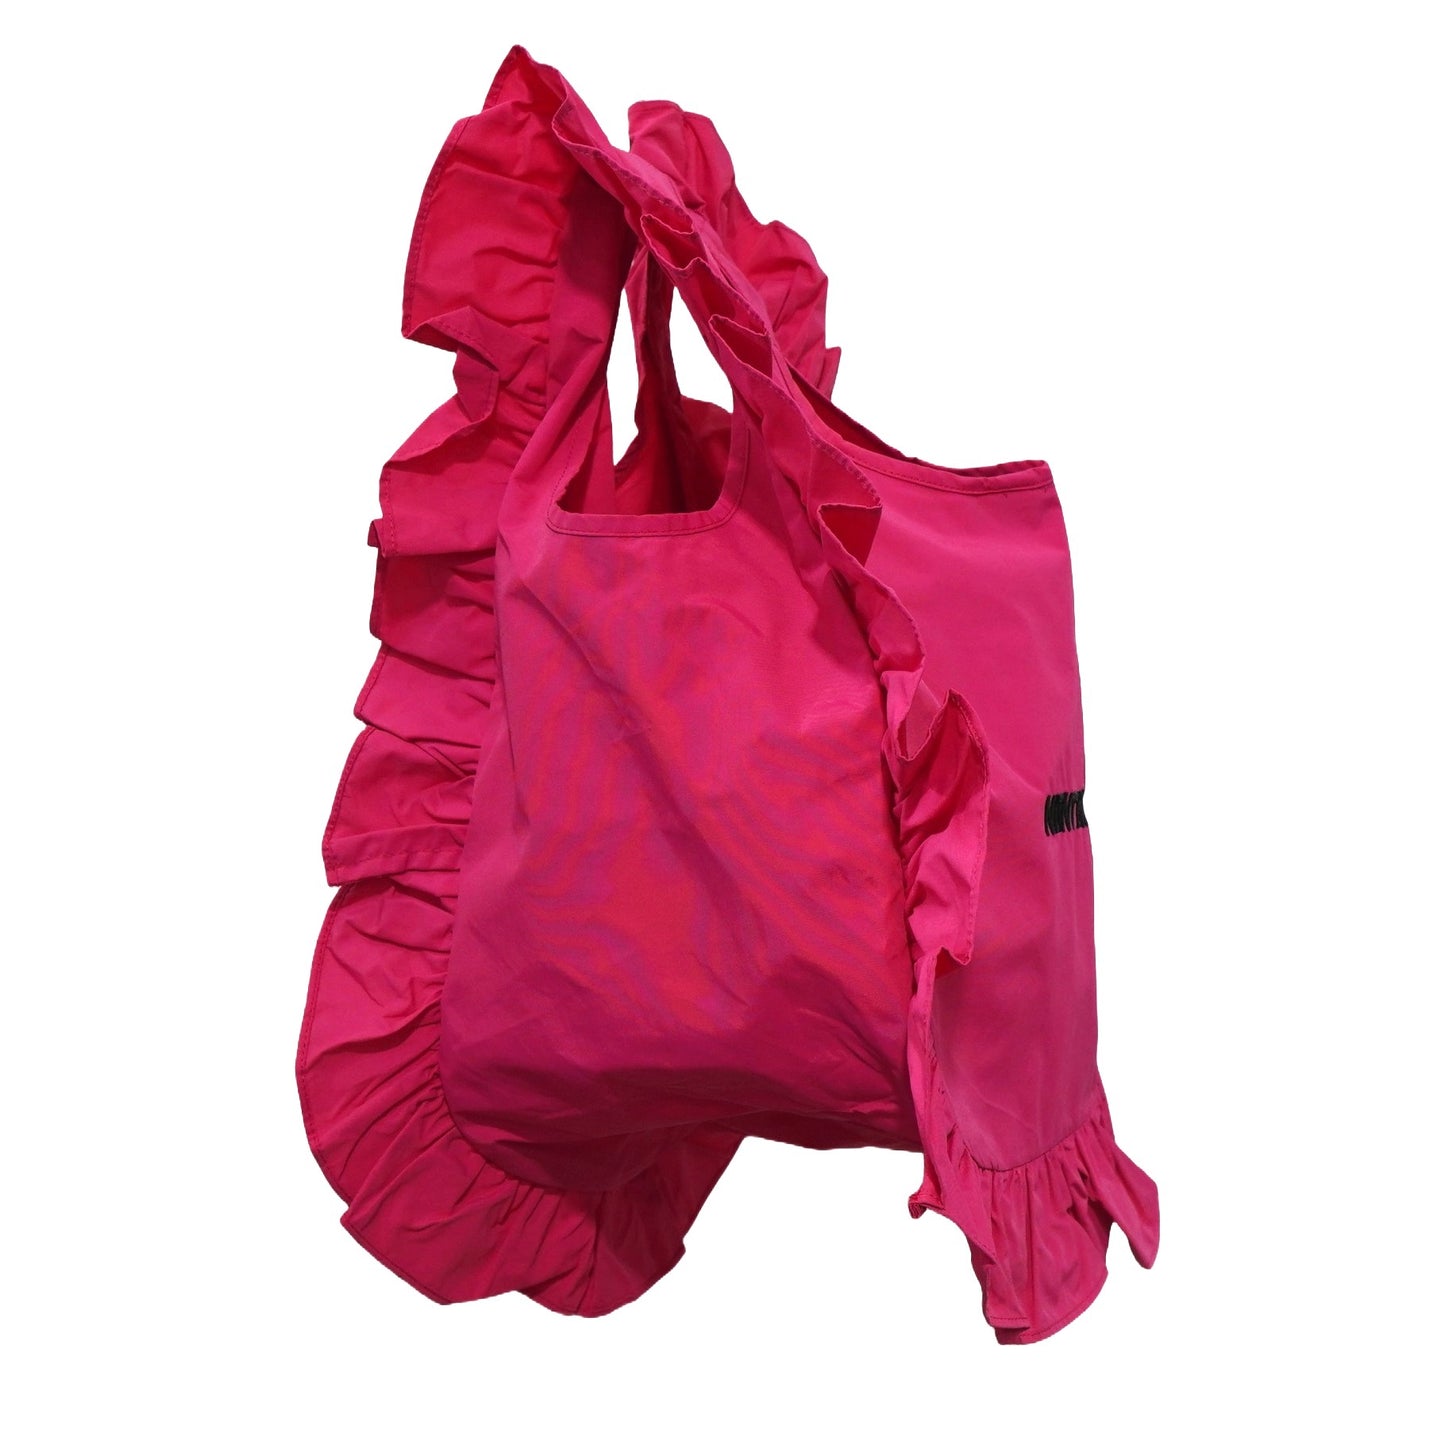 NON TOKYO / FRILL ECO BAG S (PINK) / 〈ノントーキョー〉フリルエコバッグ S (ピンク)